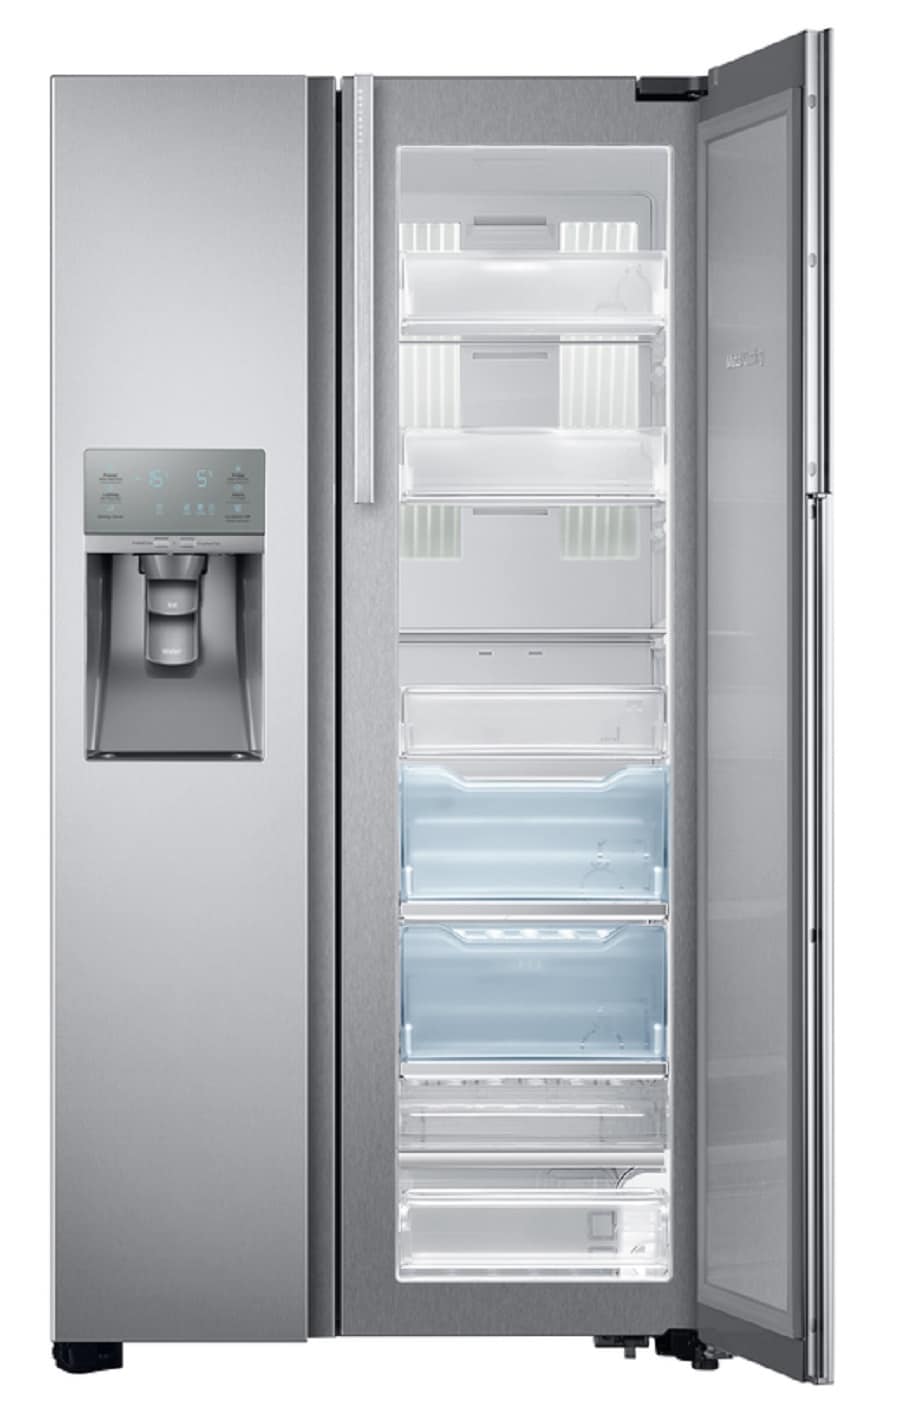 Samsung 26.7 cu. ft. Side-by-Side Smart Refrigerator with 21.5